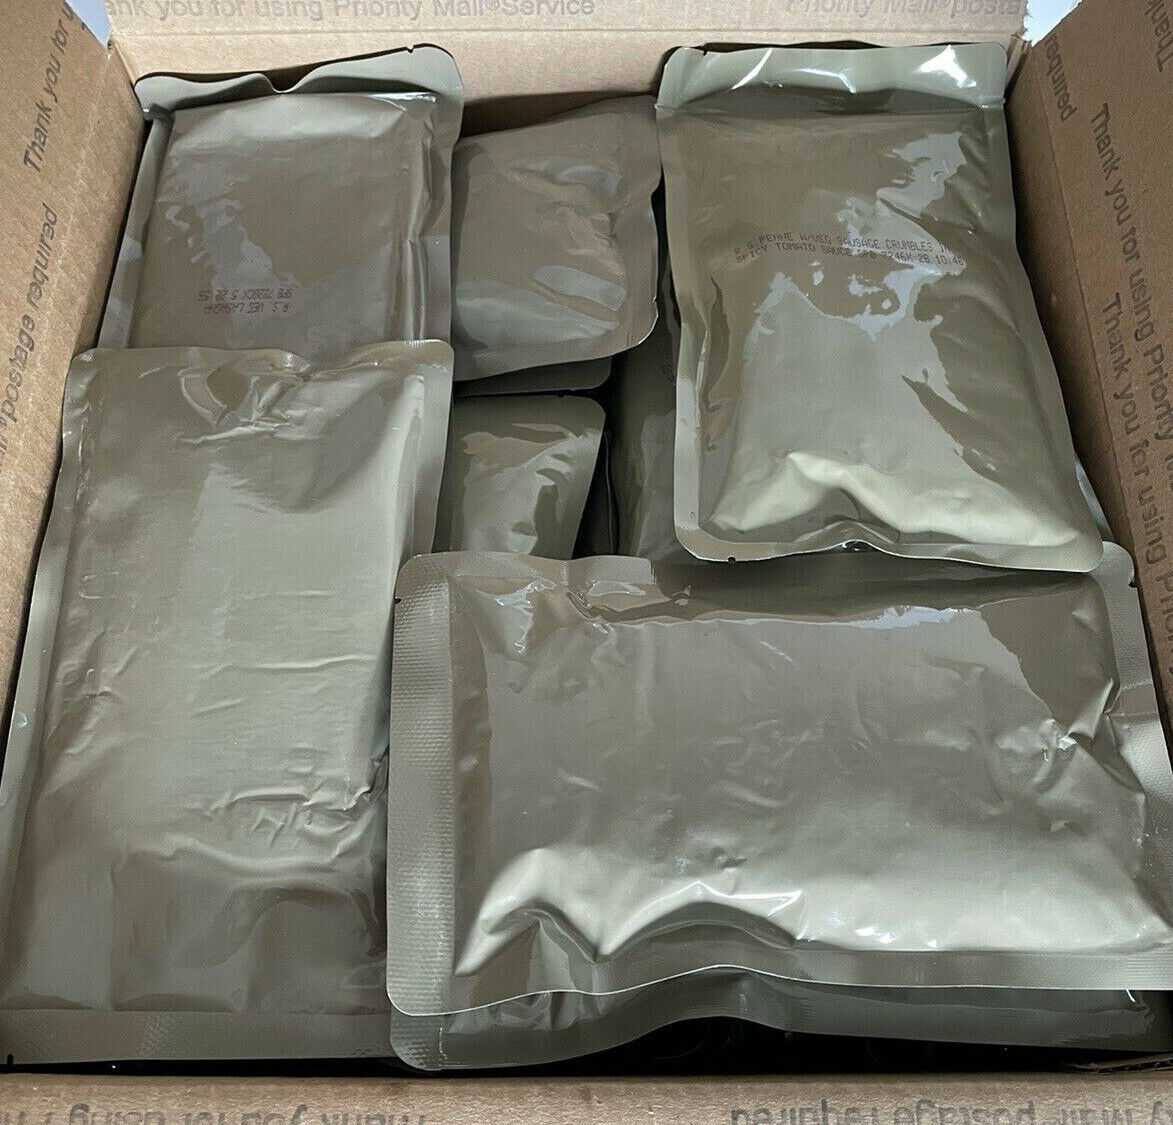 21 Pack MRE Variety 6 Types Entrees from Meals Ready to Eat Sopakco (Oscar21)